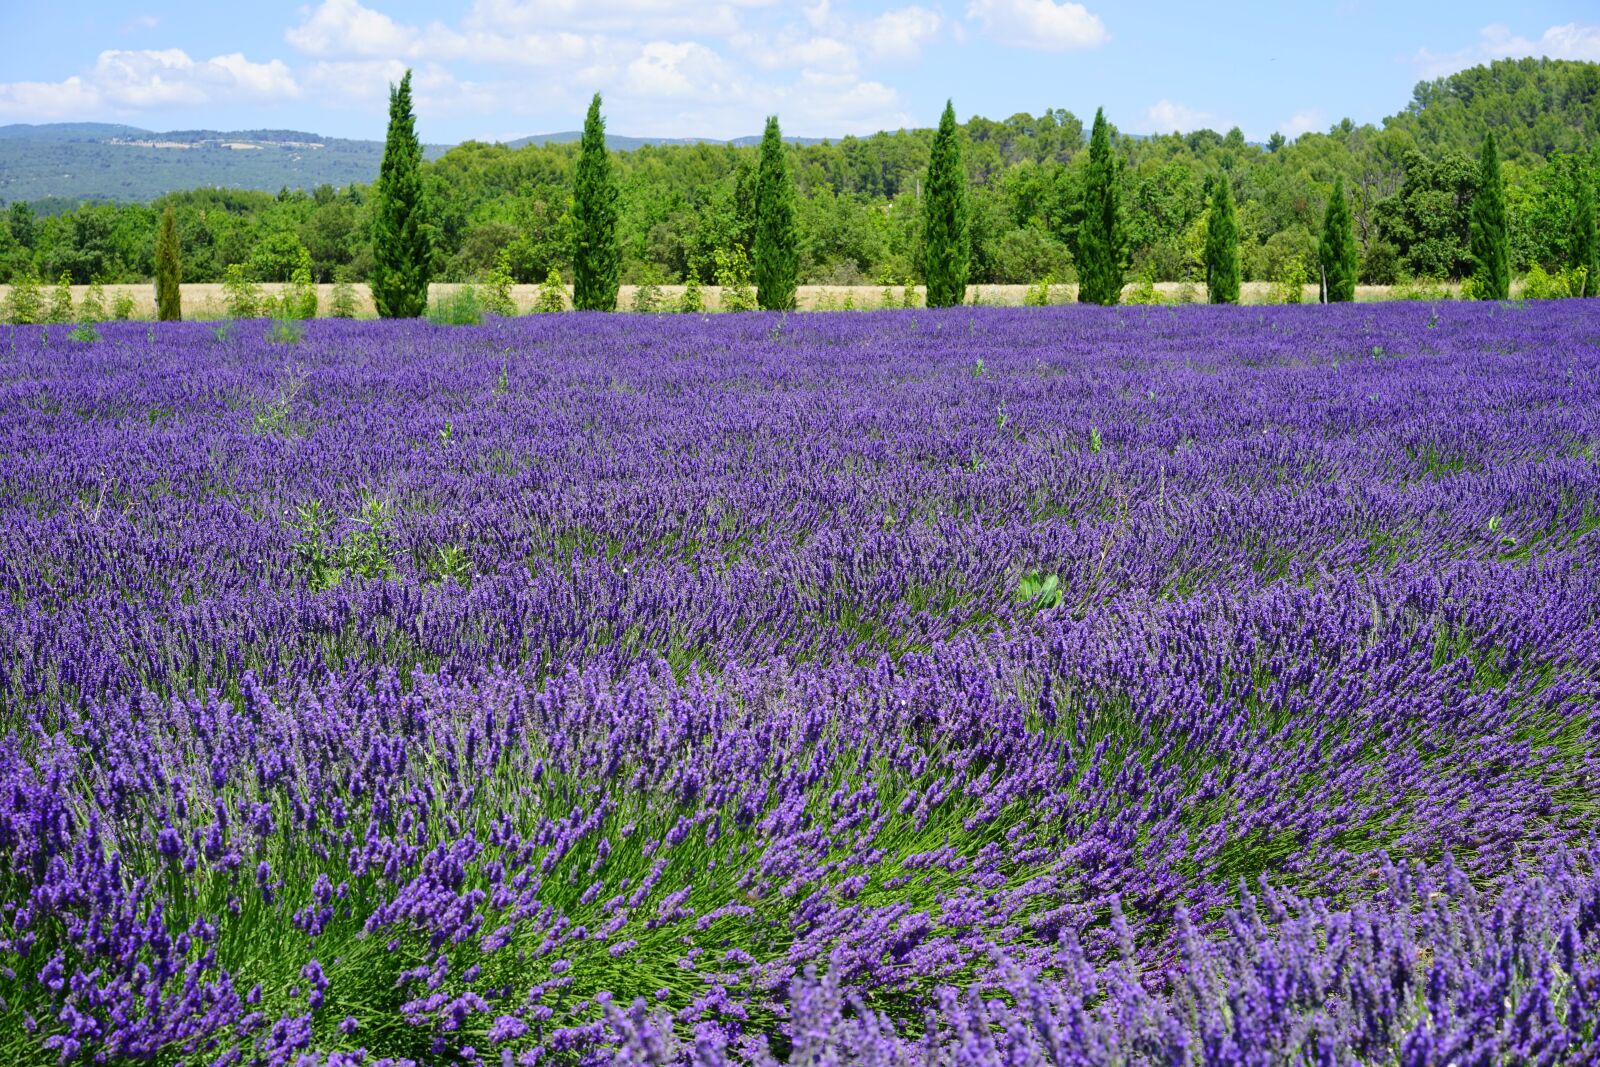 Sony a7 sample photo. Lavender, lavender field, lavender photography